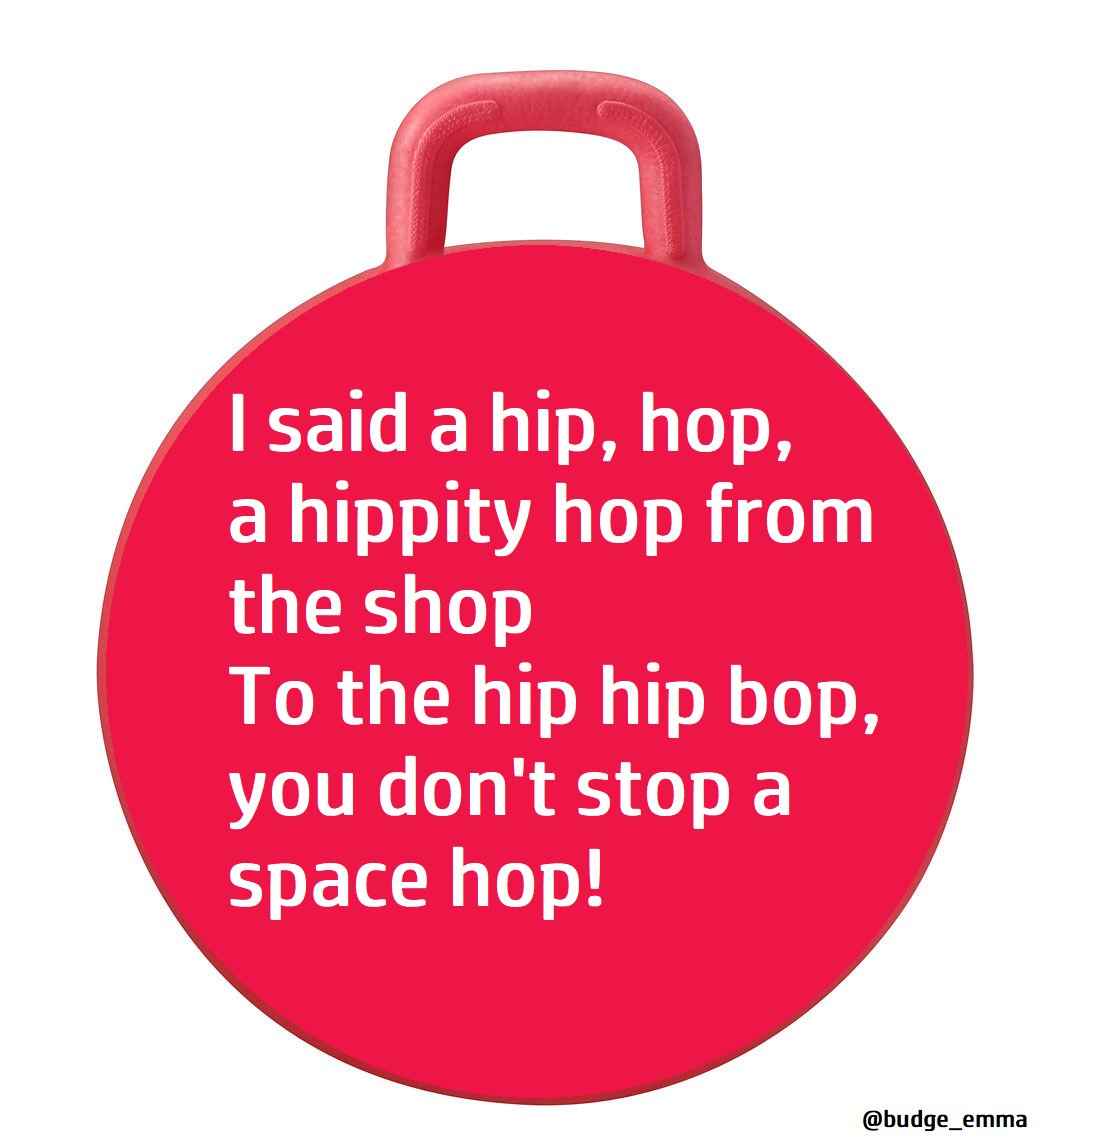 One Minute Brief of the Day:
Advertise #SPACEHOPPERS  @OneMinuteBriefs 

'Children's Delight'

#hiphop #spacebop #rappersdelight #exercise #childrenstoys

@Argos_Online
@SmythsToysUK
@EntertainerToys